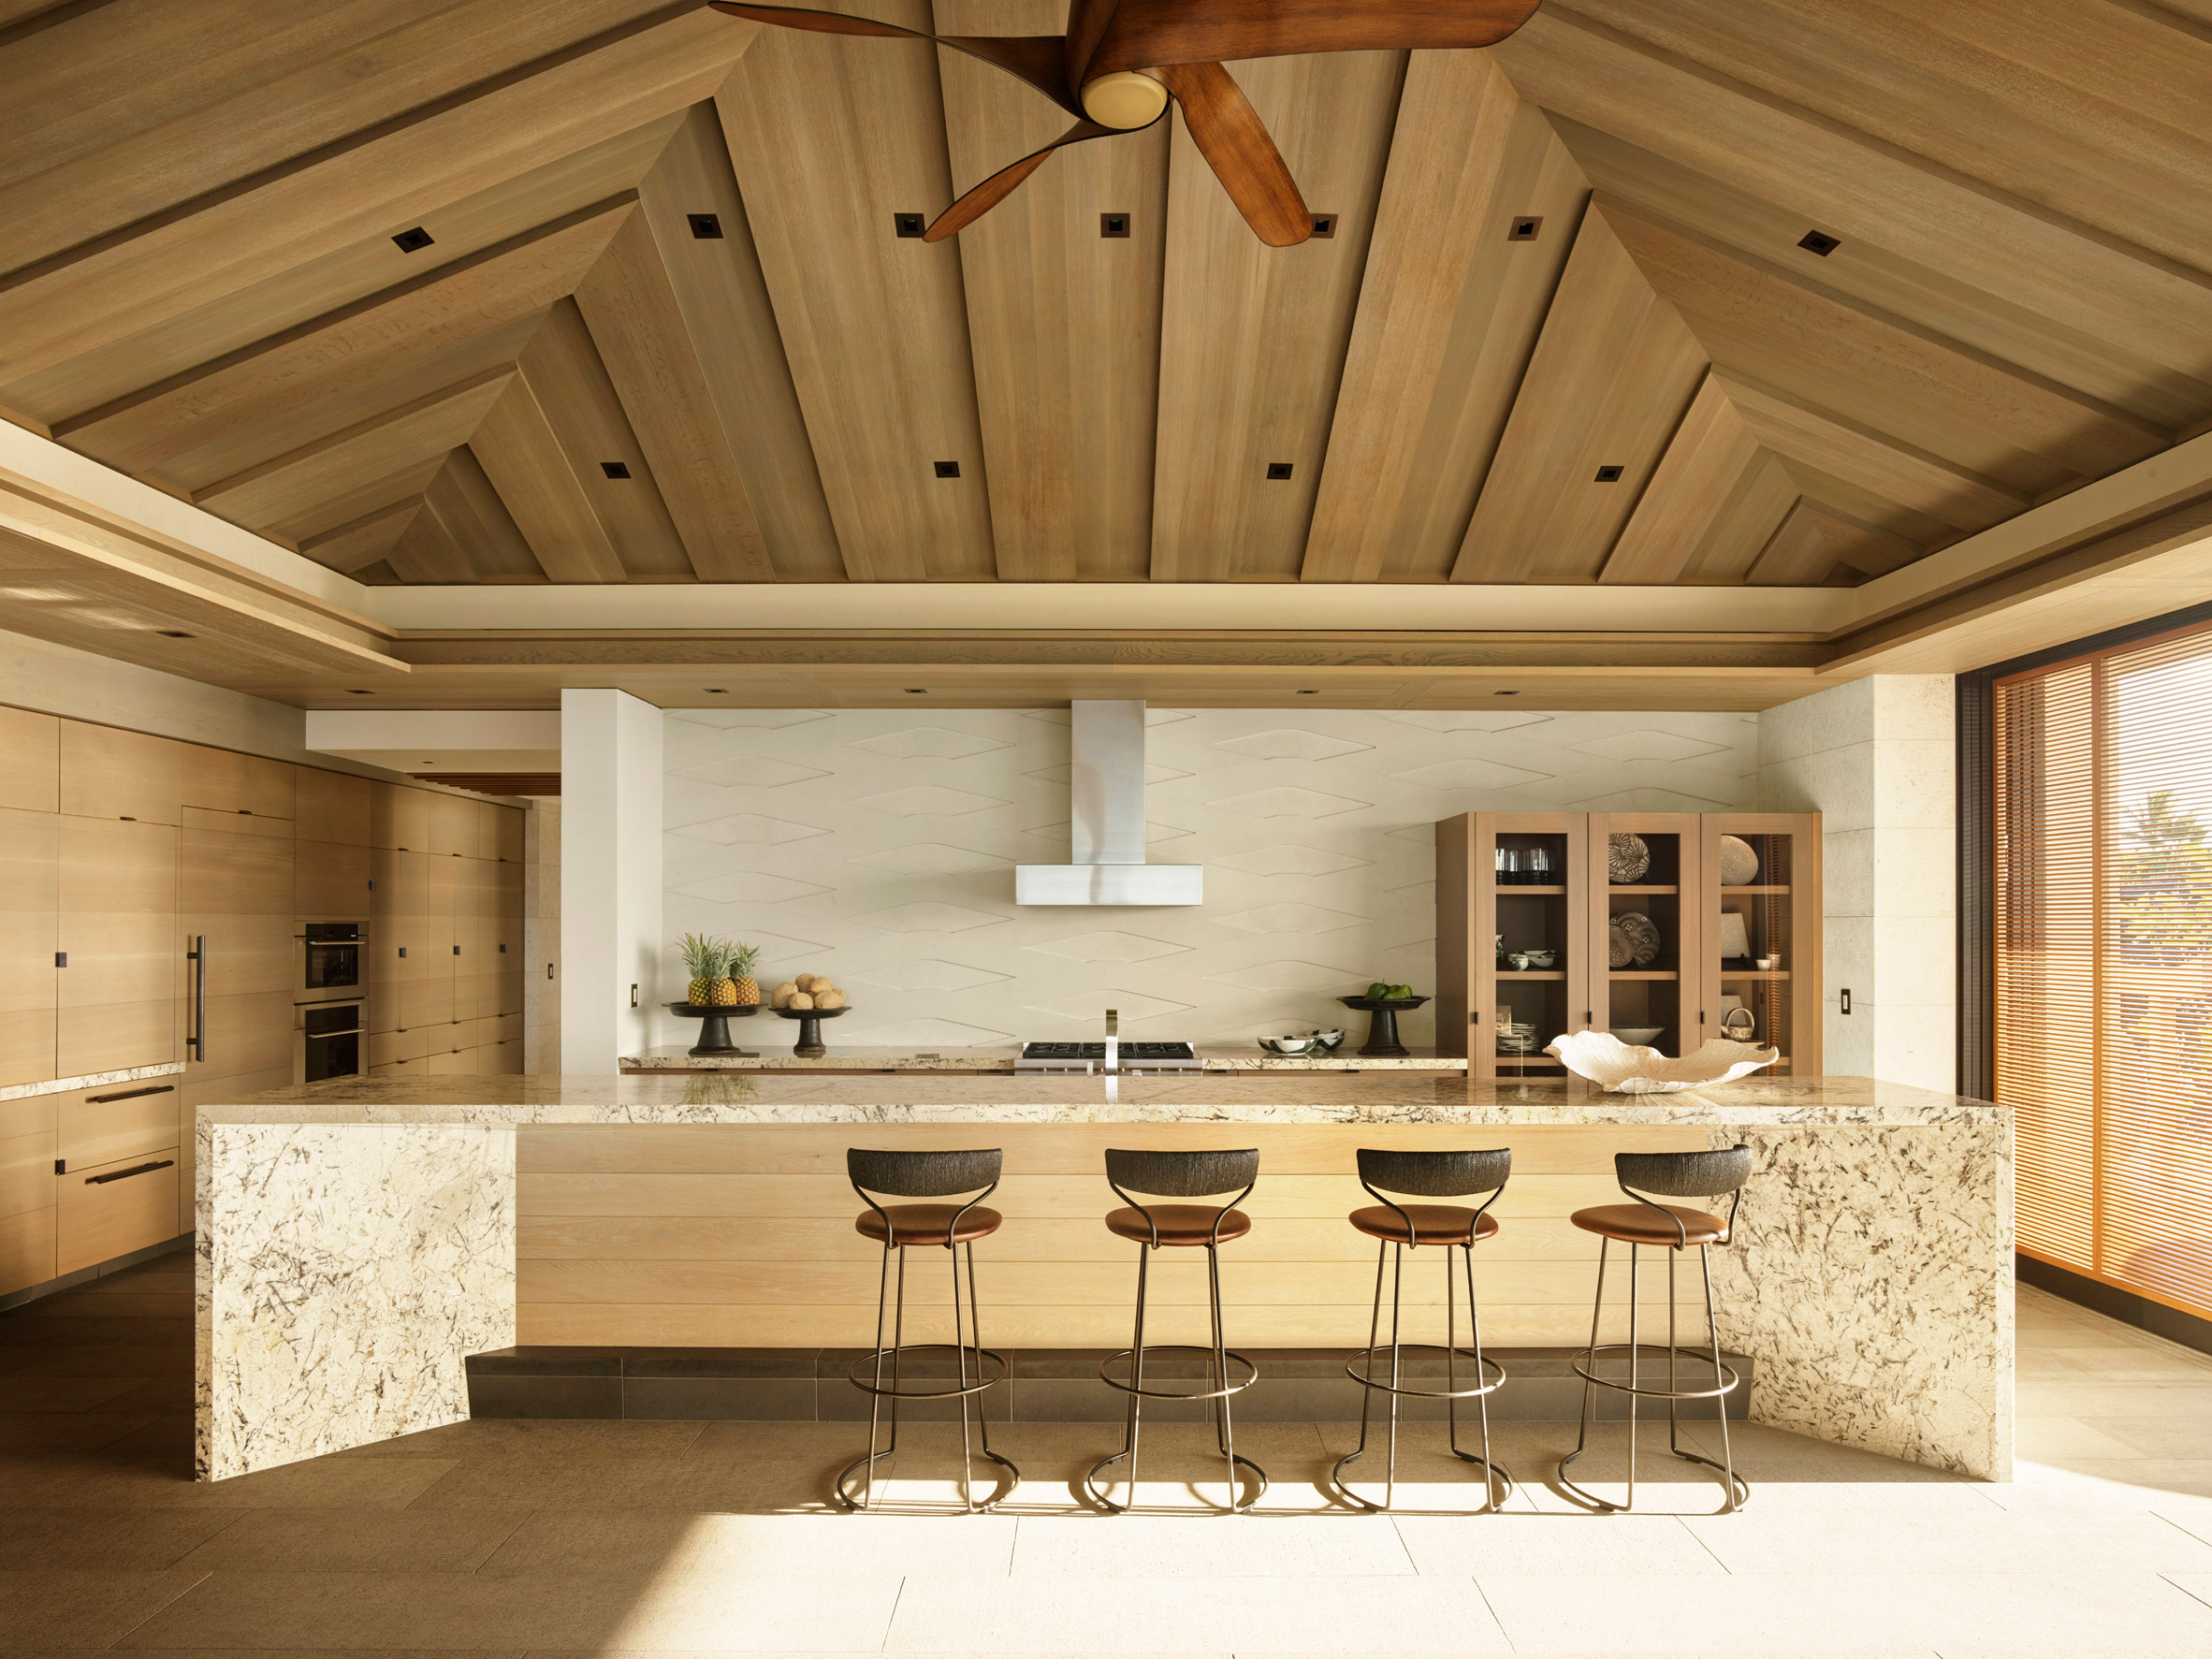 A muted palette of wood is seen in the kitchen